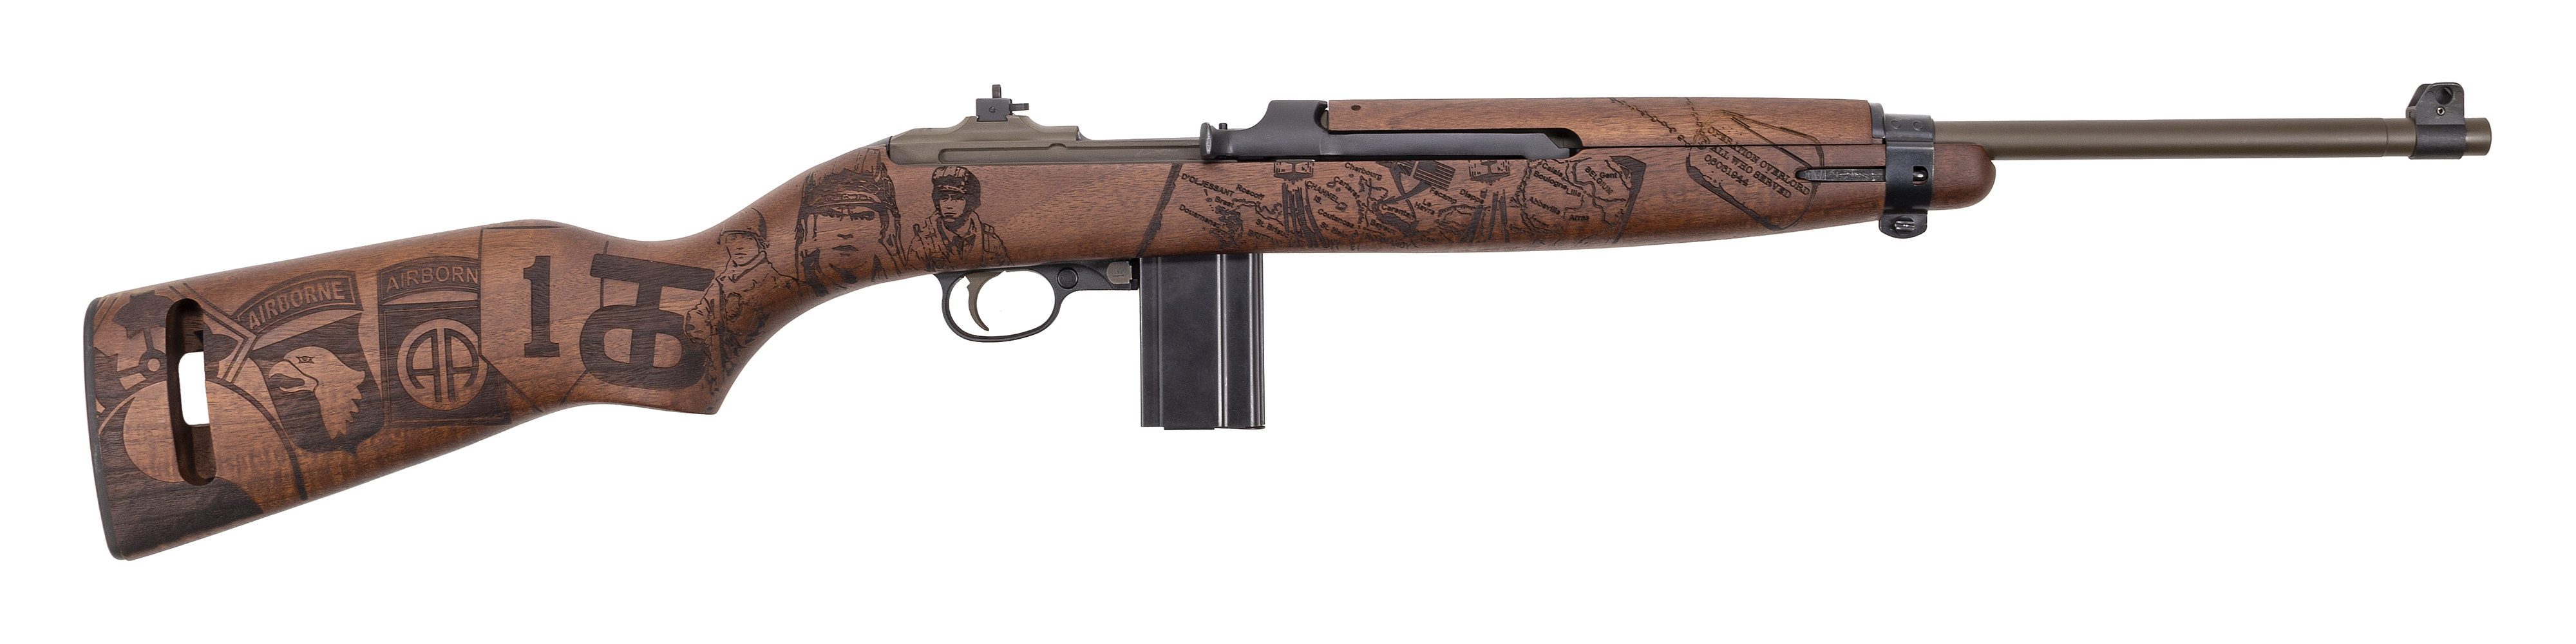 M1 Carbine Special Editions